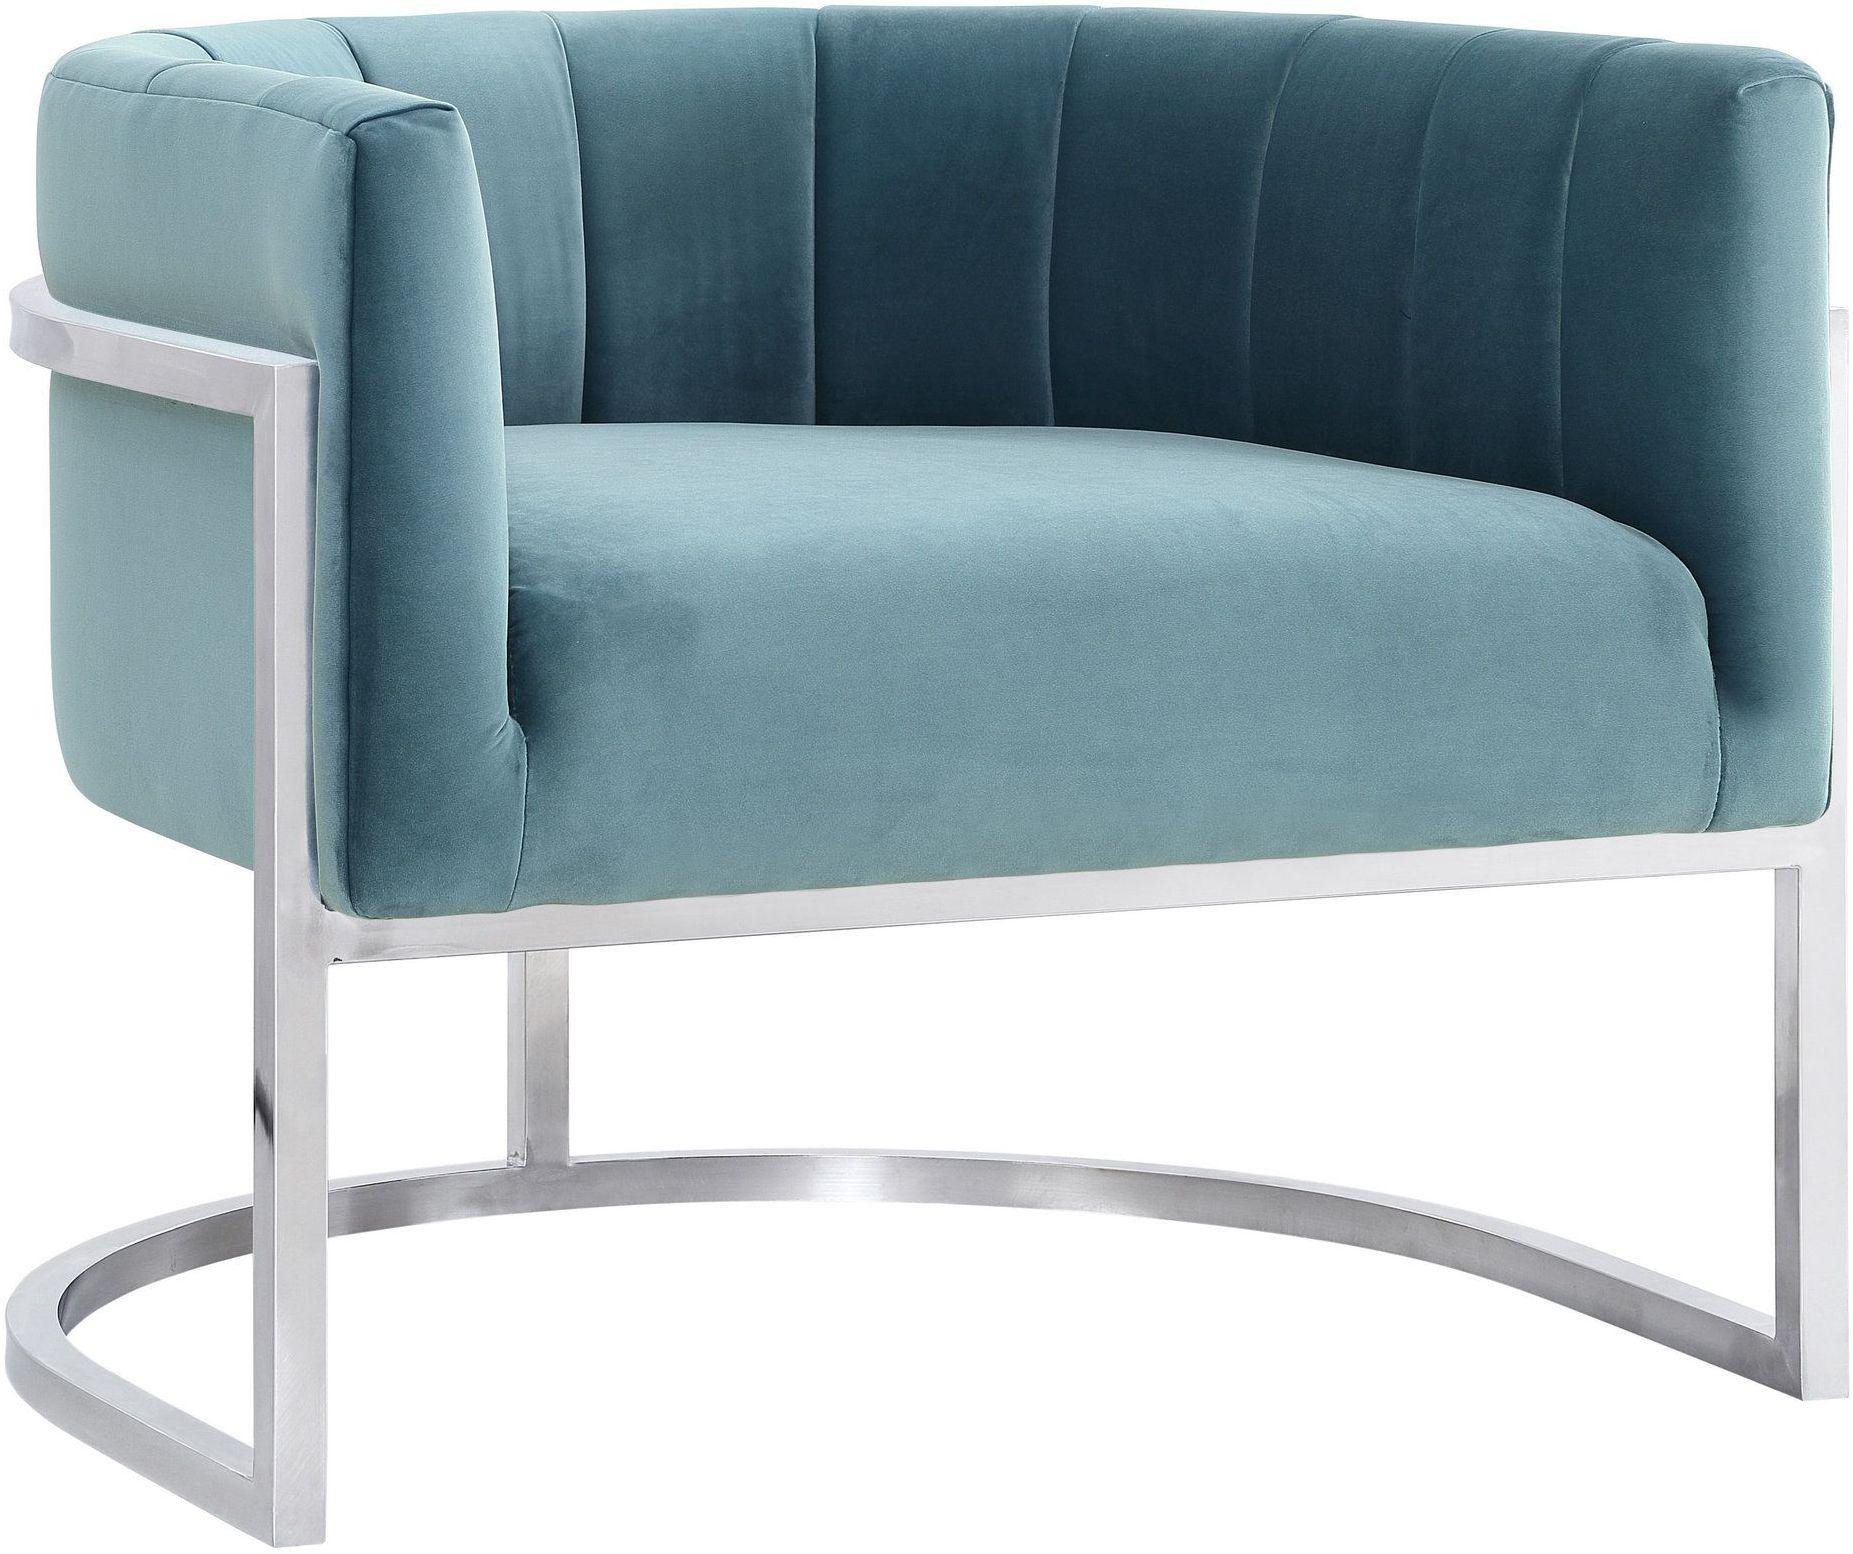 Tov Furniture Accent Chairs - Magnolia Sea Blue Chair with Silver Base